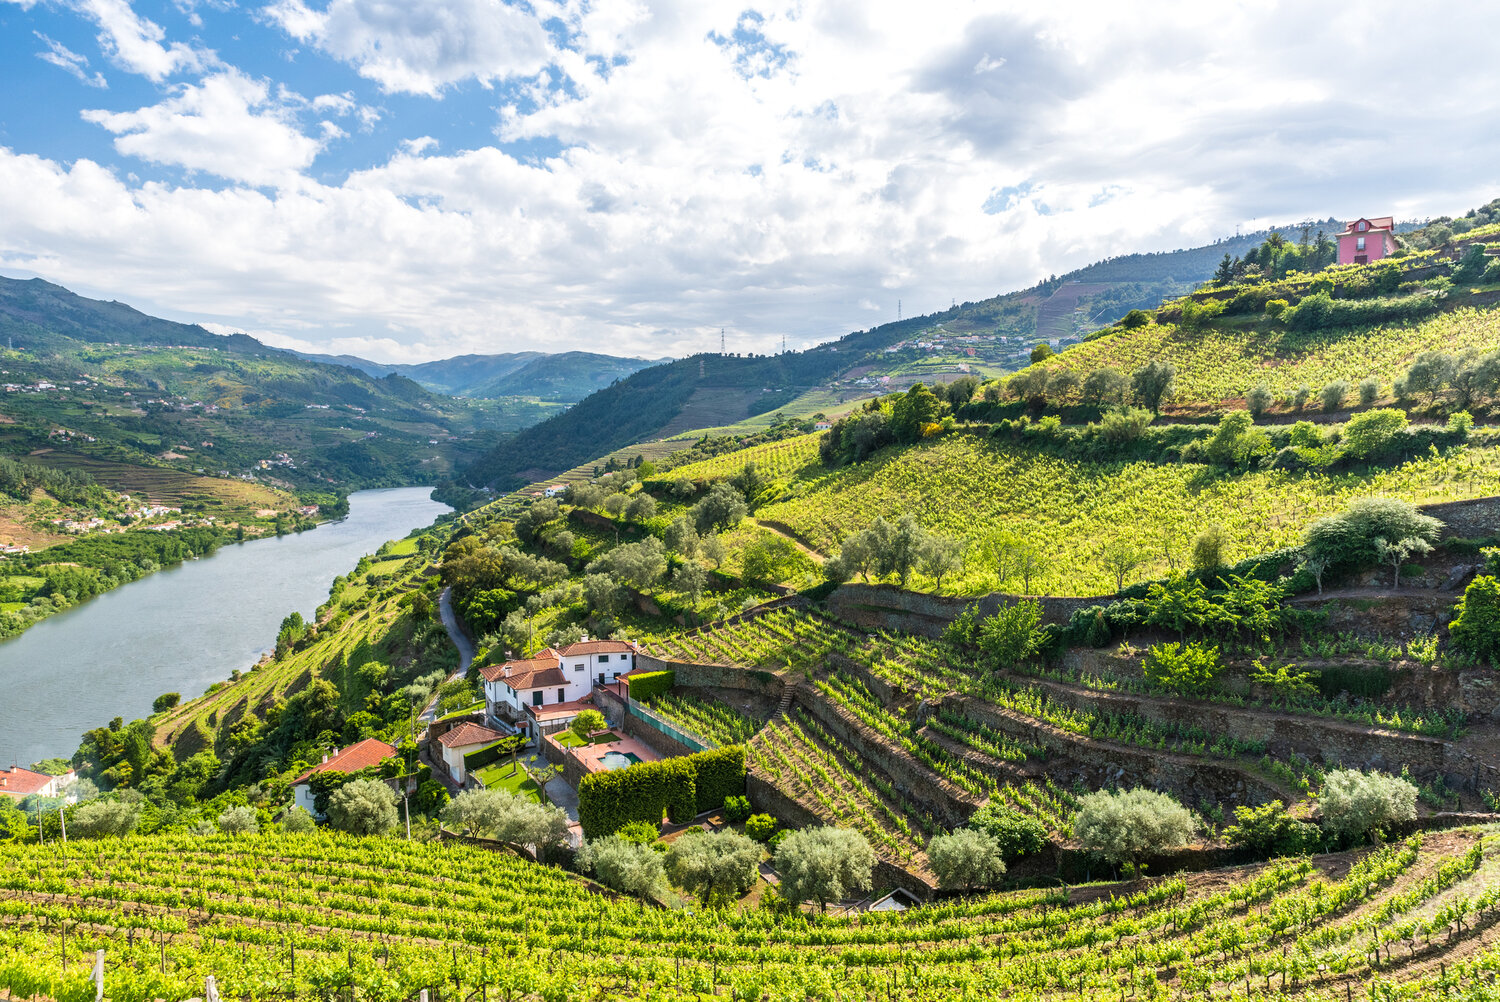 The Douro region, very close to Spain, produces large, dry red wines with intense, concentrated flavors.